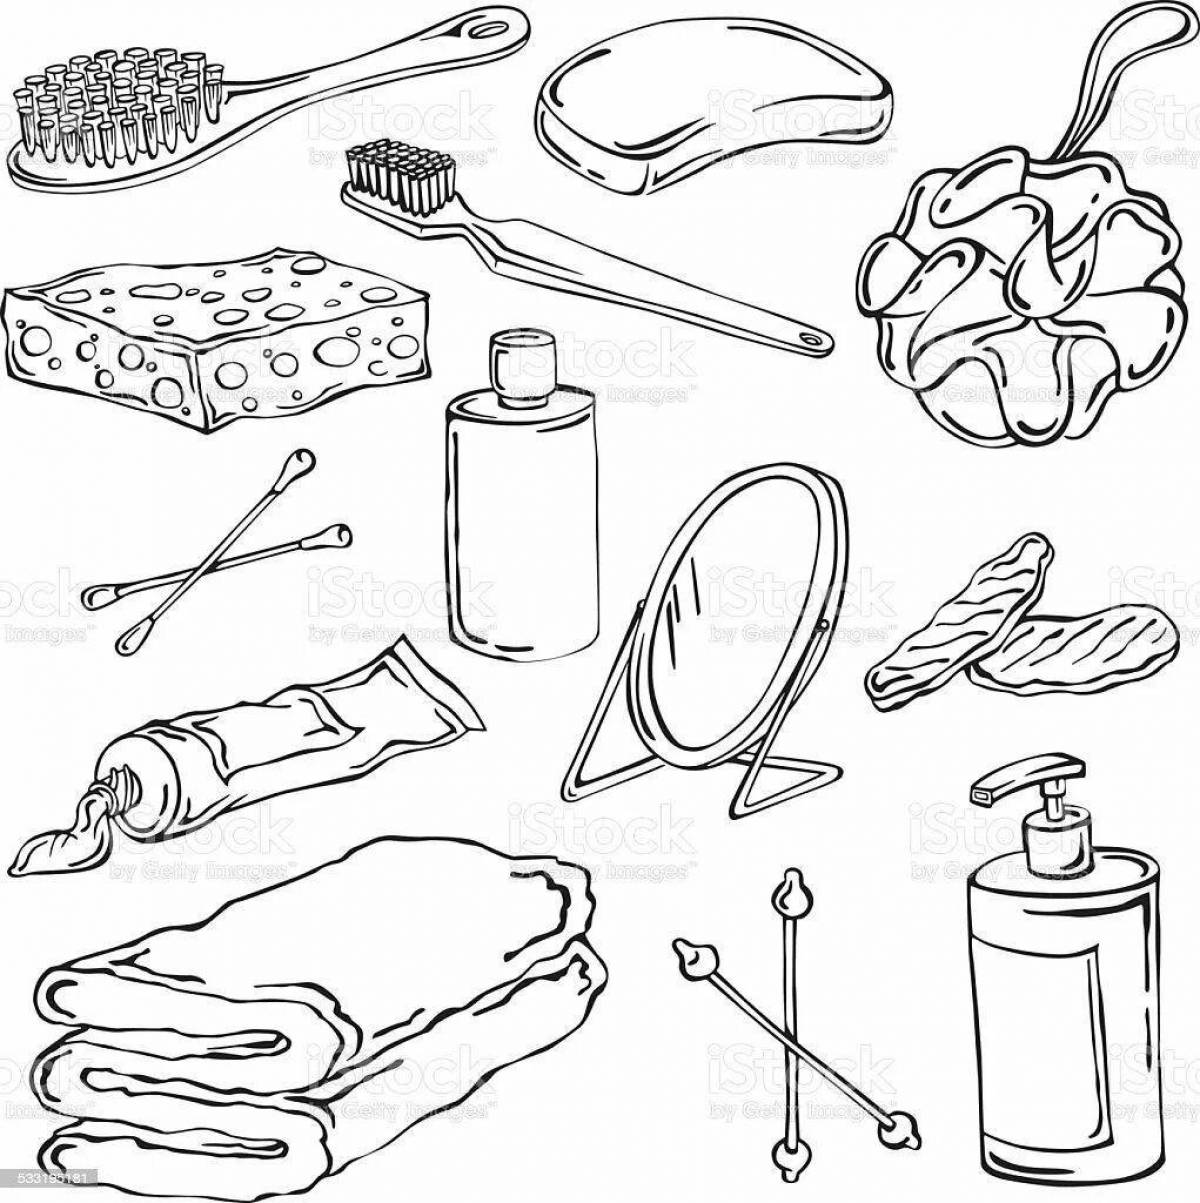 Fun coloring pages with hygiene items for kids